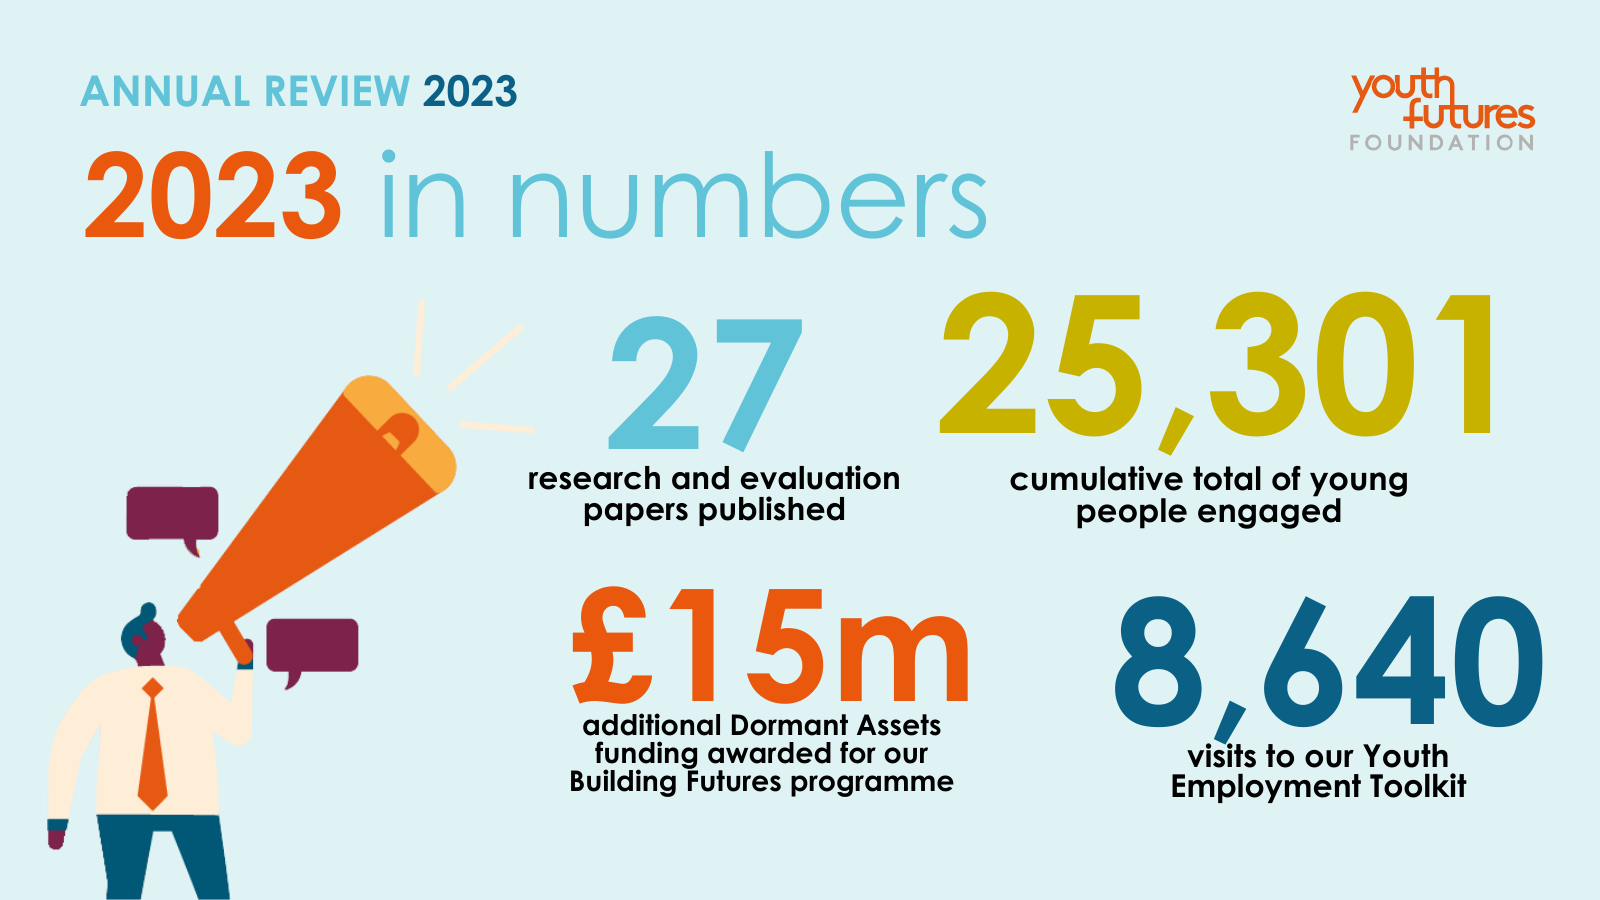 2023 in numbers: - 27 research and evaluation papers published - 25,301 cumulative total of young people engaged -£15m additional Dormant Assets funding awarded for Building Futures - 8,640 visits to Youth Employment Toolkit